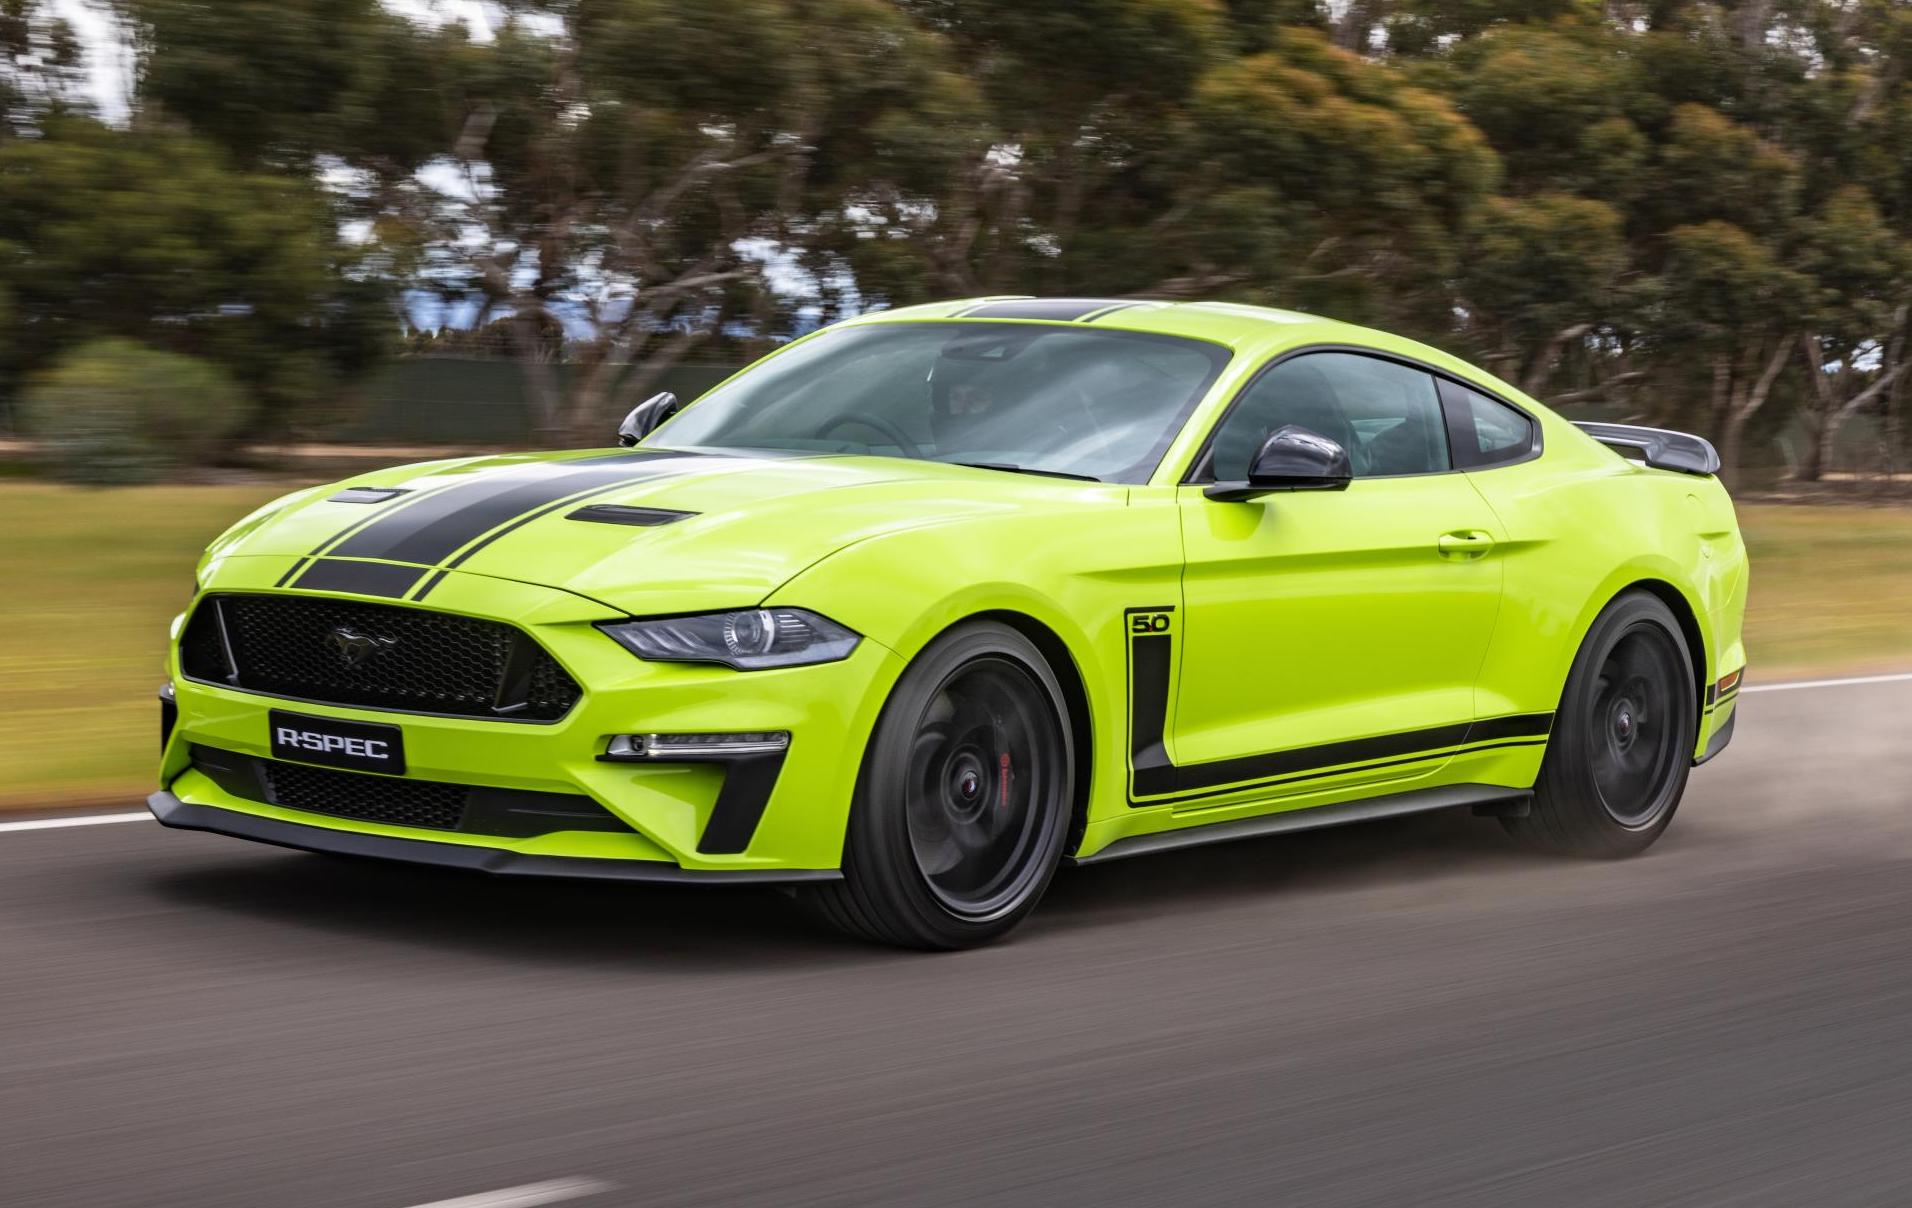 Supercharged Ford Mustang R-SPEC on sale in Australia